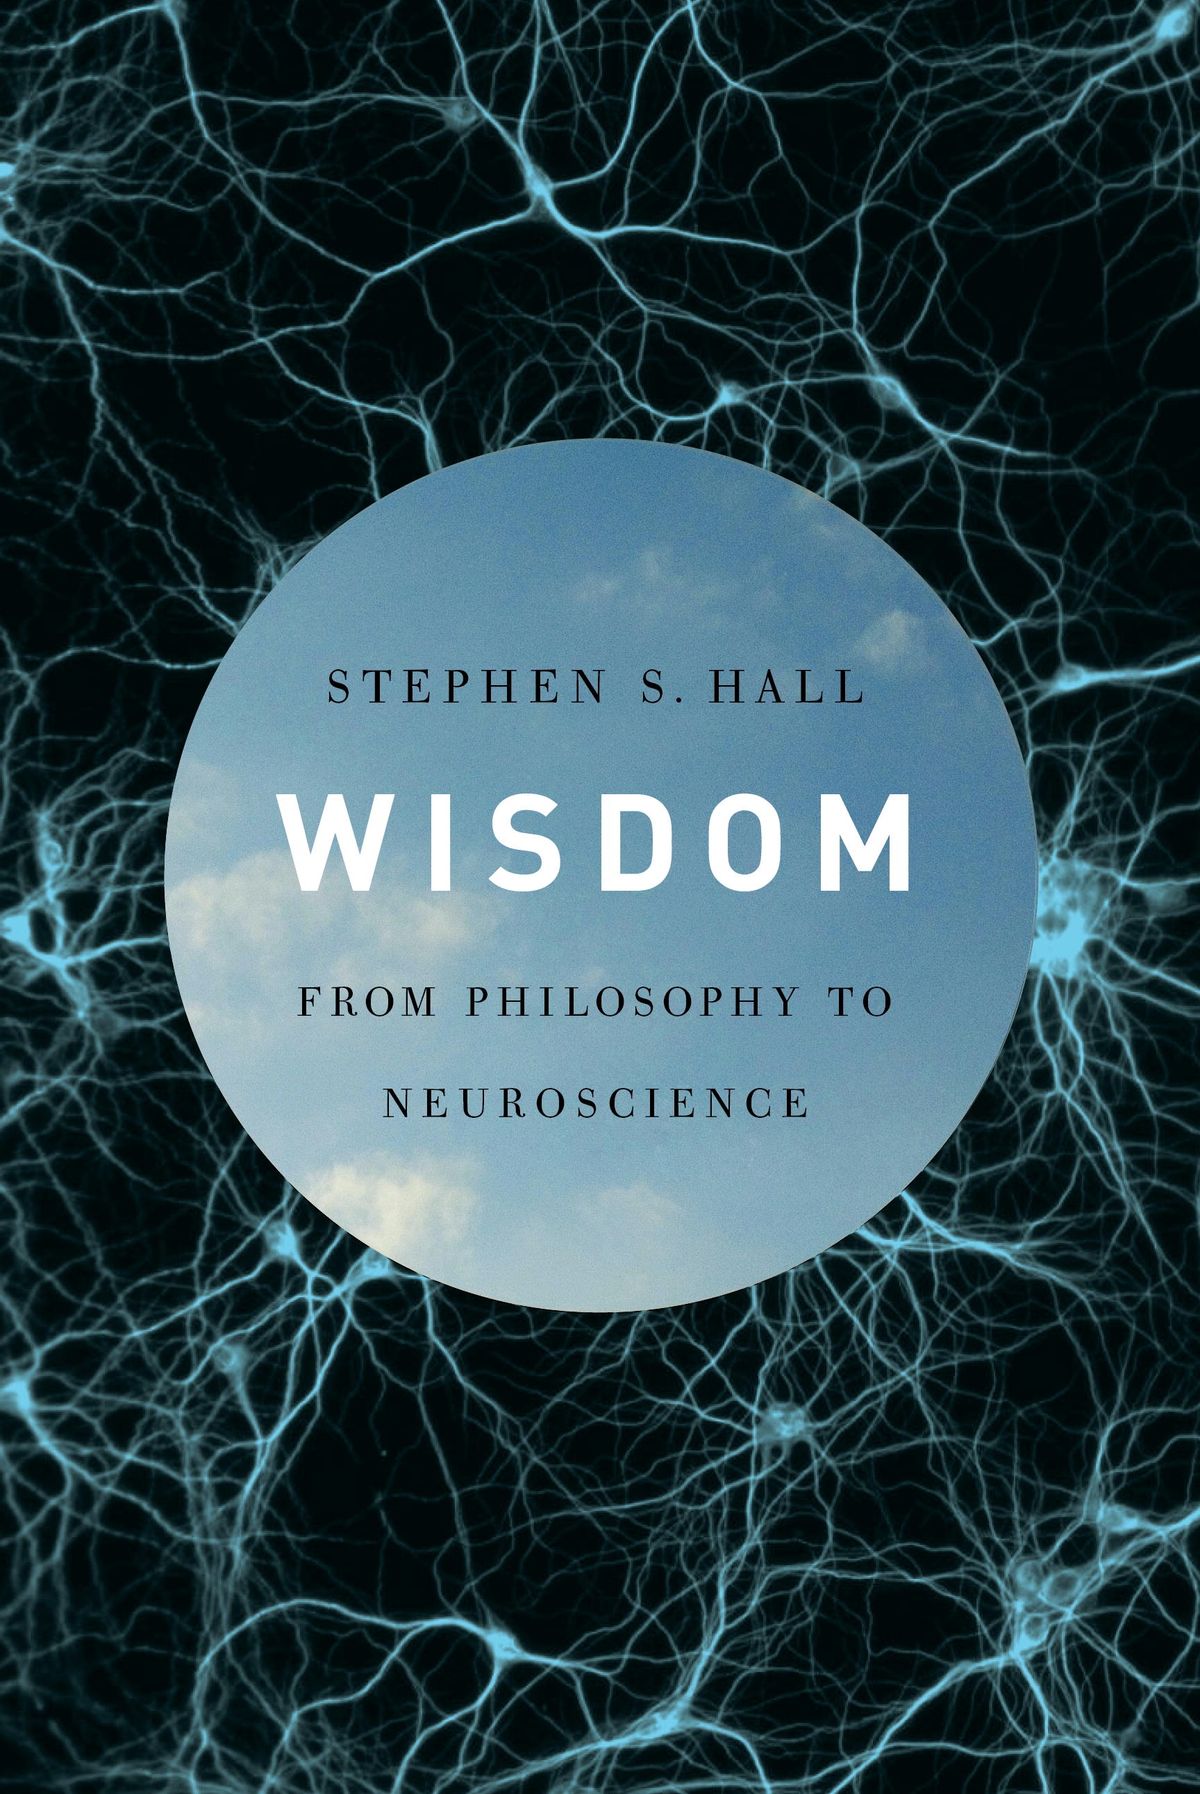 "Wisdom: From Philosophy to Neuroscience," by Stephen S. Hall 